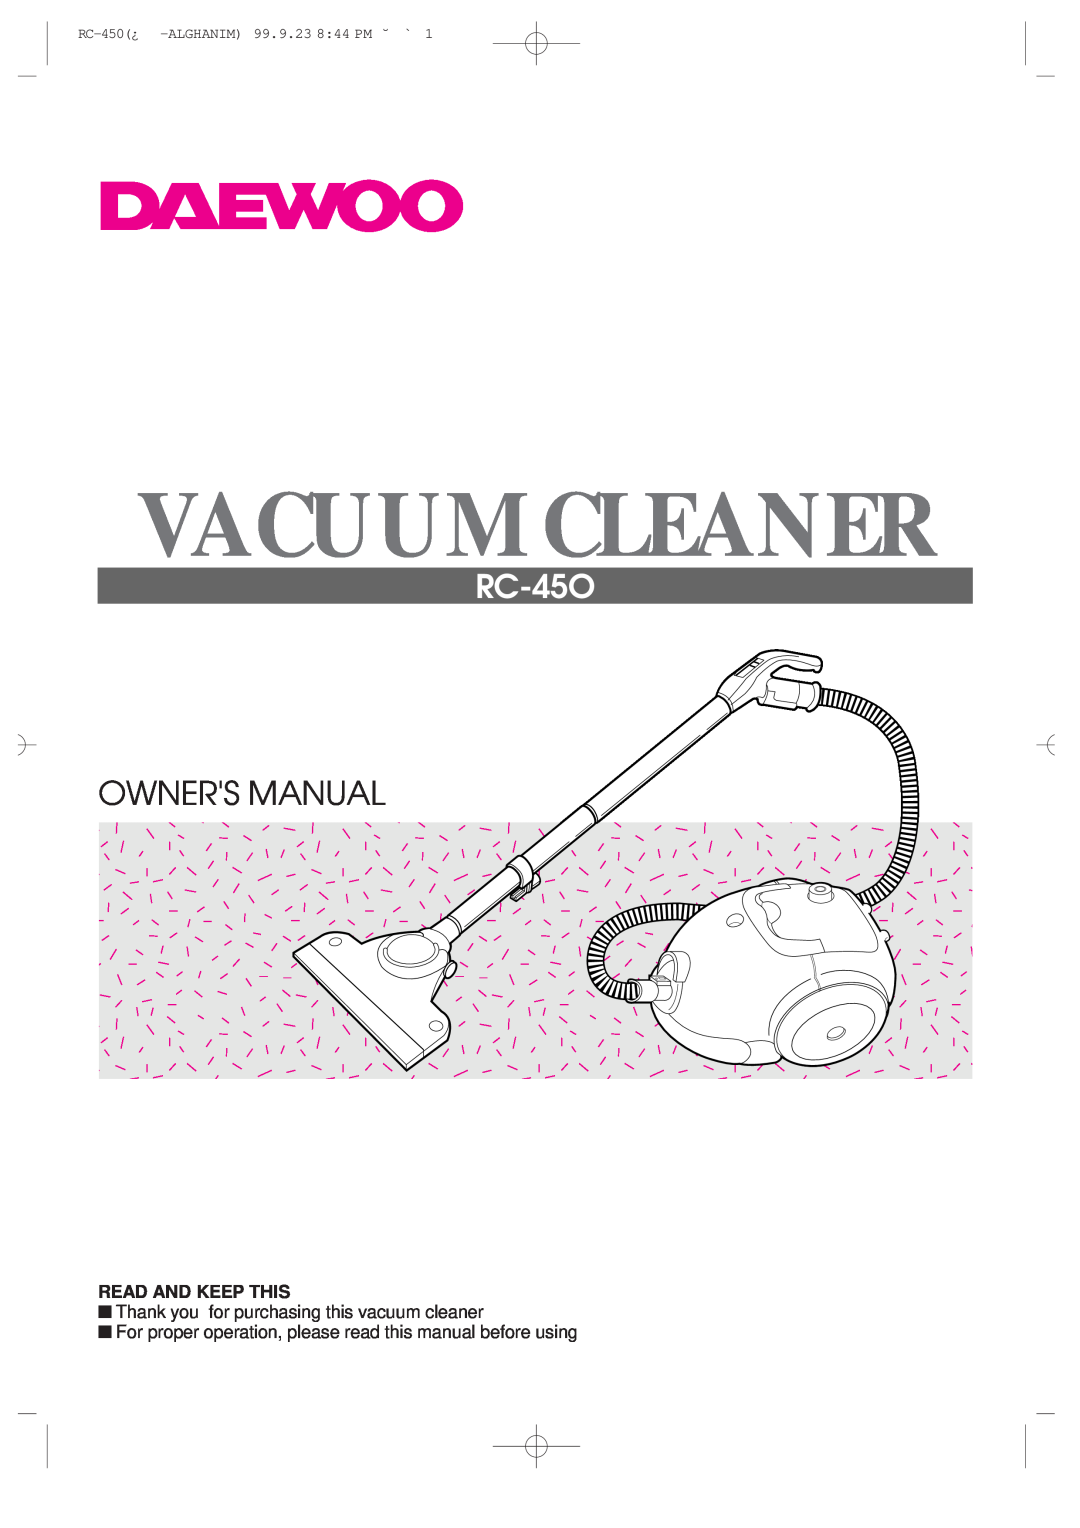 Daewoo owner manual Vacuum Cleaner, RC-45O, Read And Keep This, RC-450¿ -ALGHANIM 99.9.23 844 PM ˘ ` 